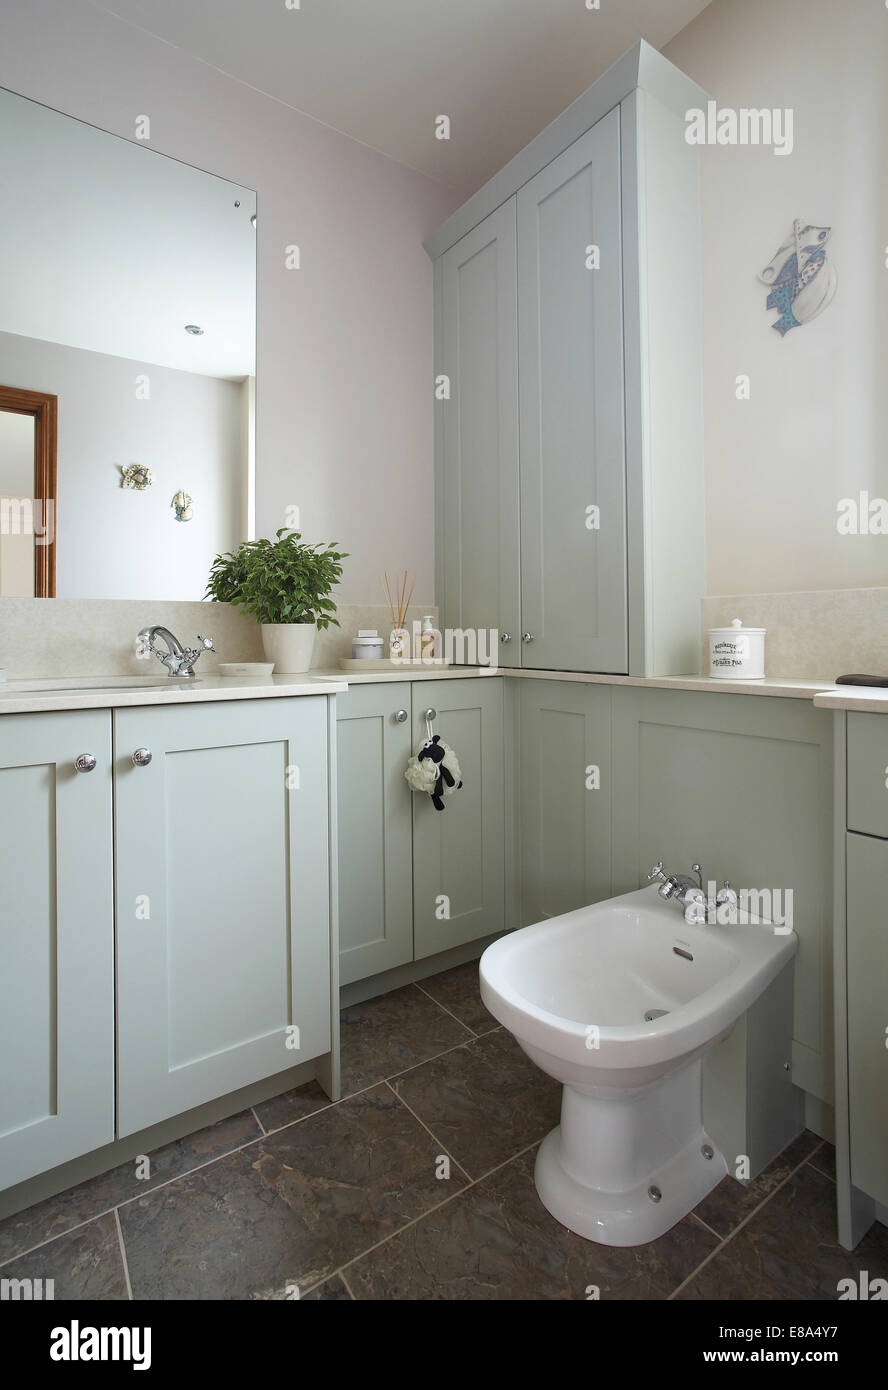 Bathroom interior in a home in the UK in a pastel blue - green color. Stock Photo